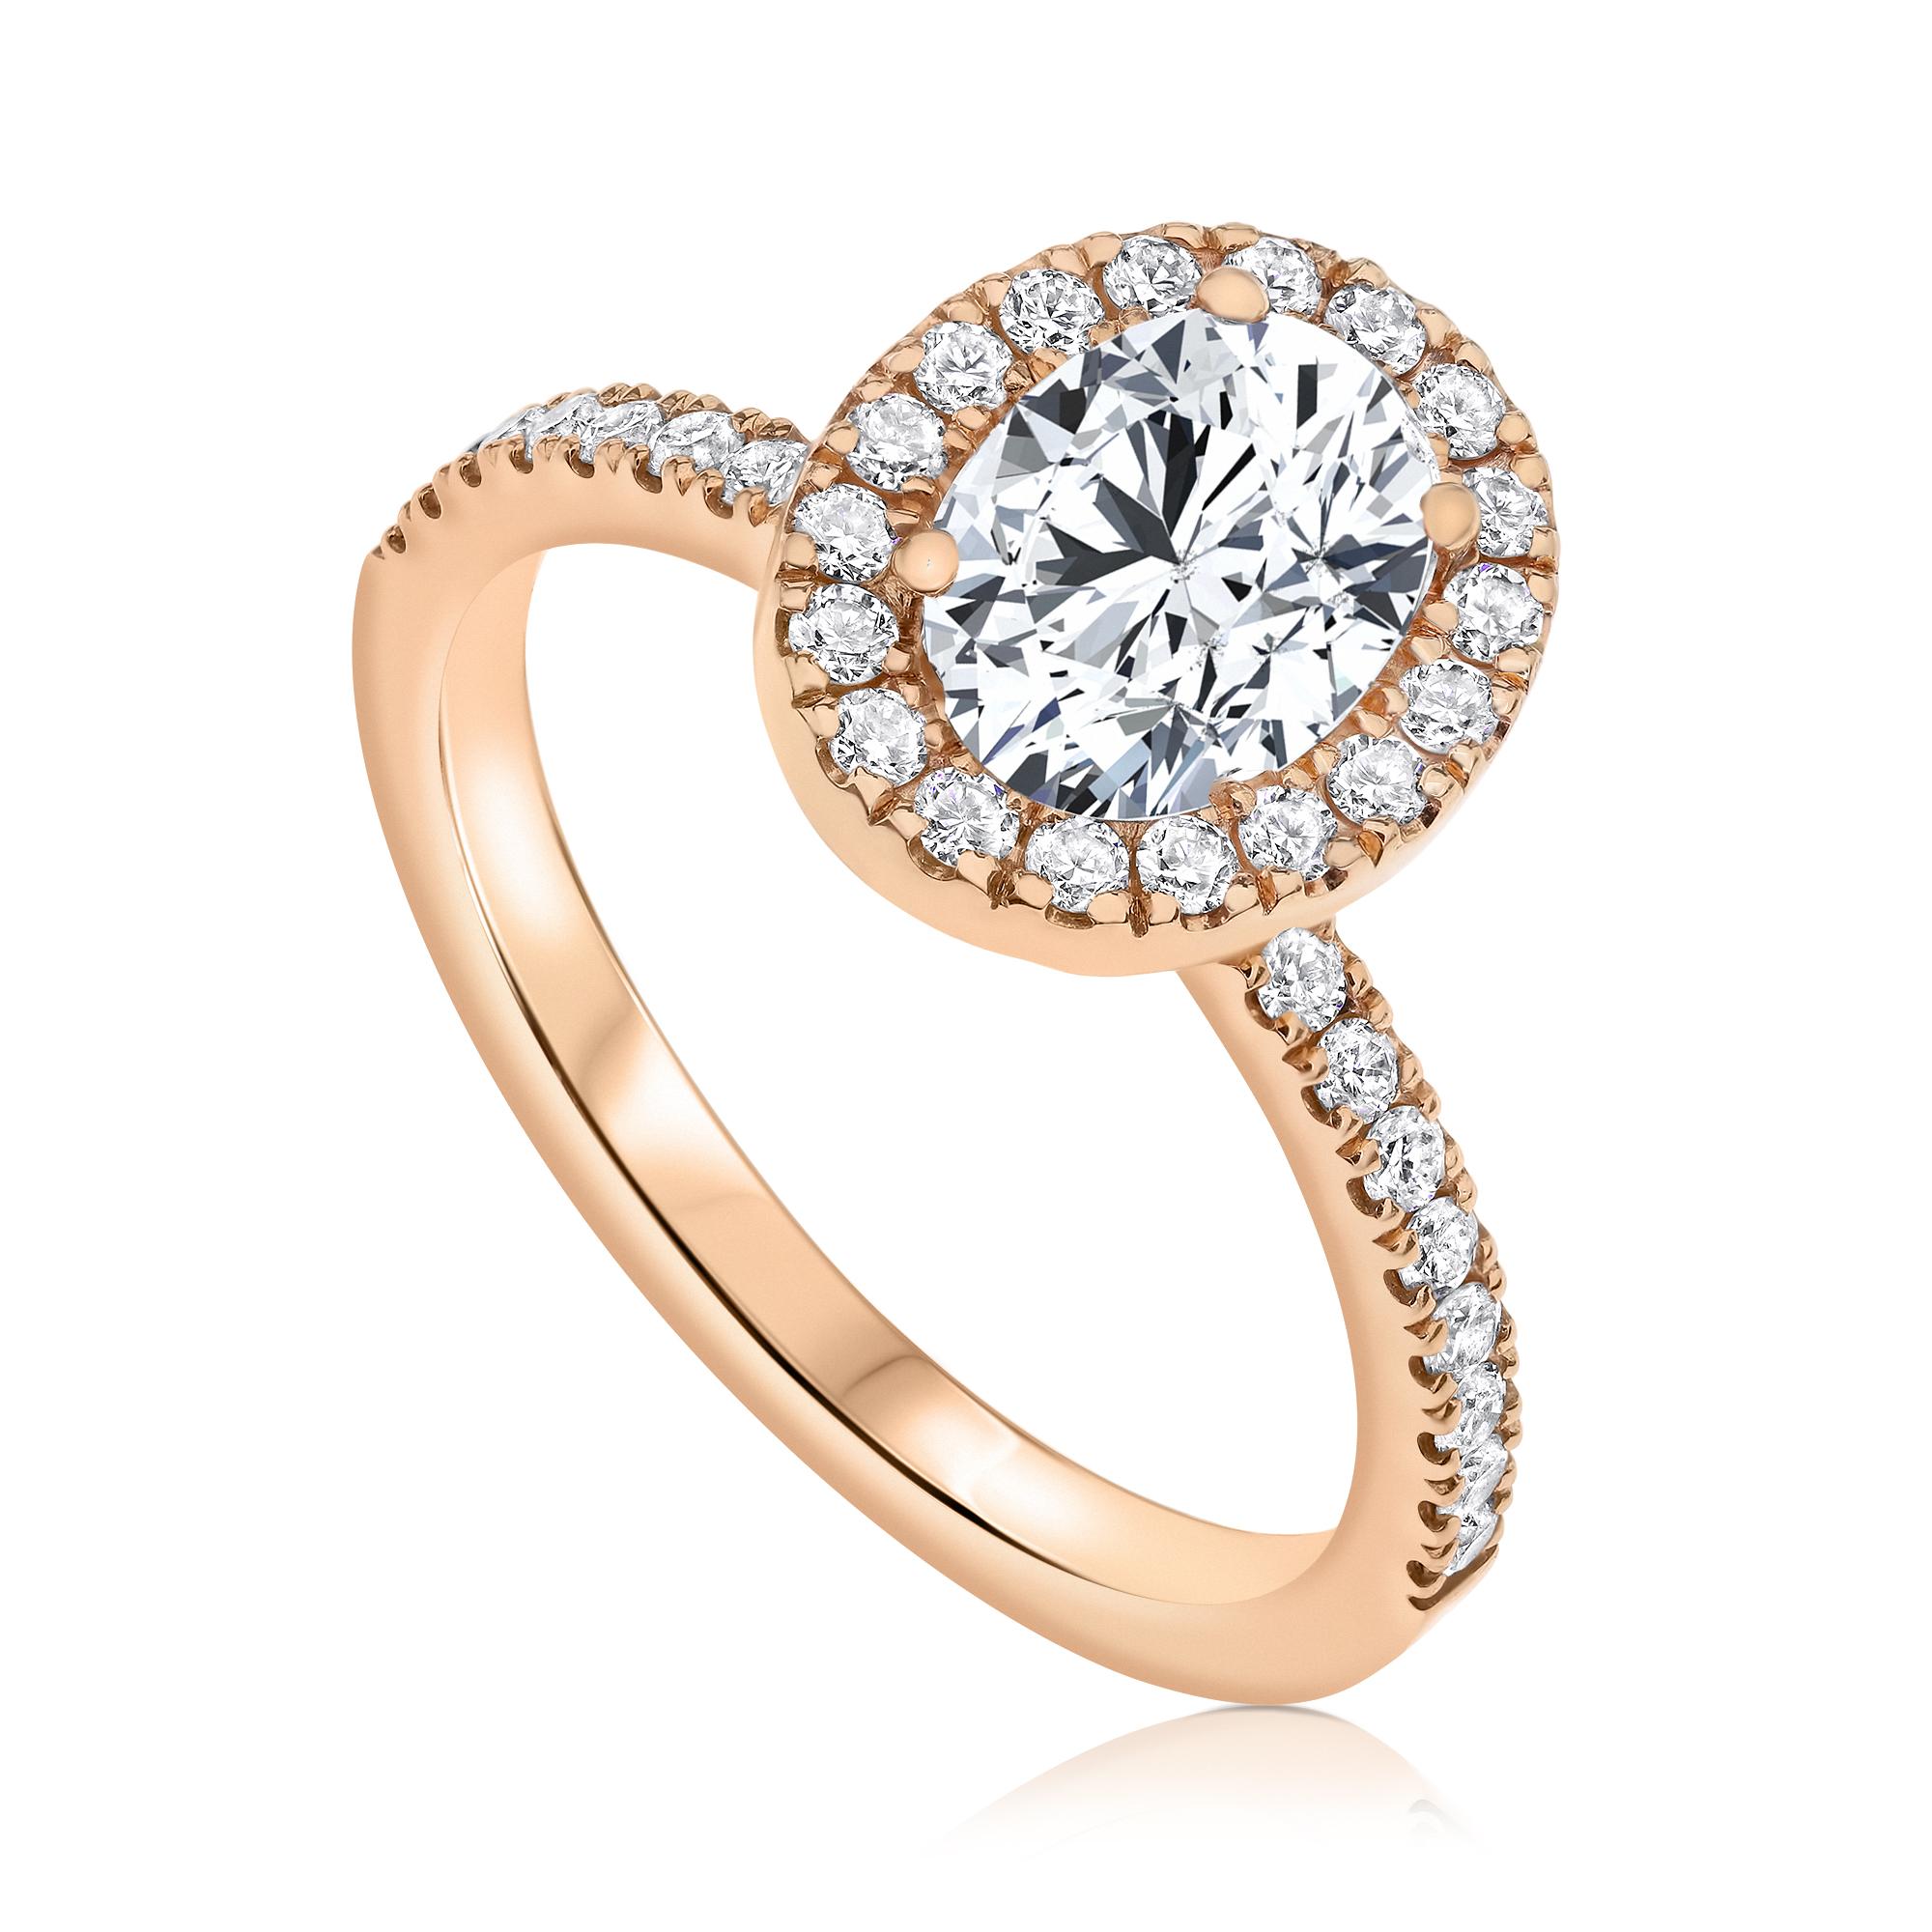 1.40 Carat EGL Certified Oval Shaped Diamond Halo Ring in 14 Karat Rose Gold 

Shlomit Rogel's halo diamond ring is a gorgeous engagement ring set with all natural shiny excellent cut diamonds. Center diamond is oval shaped 1.00 carat EGL certified